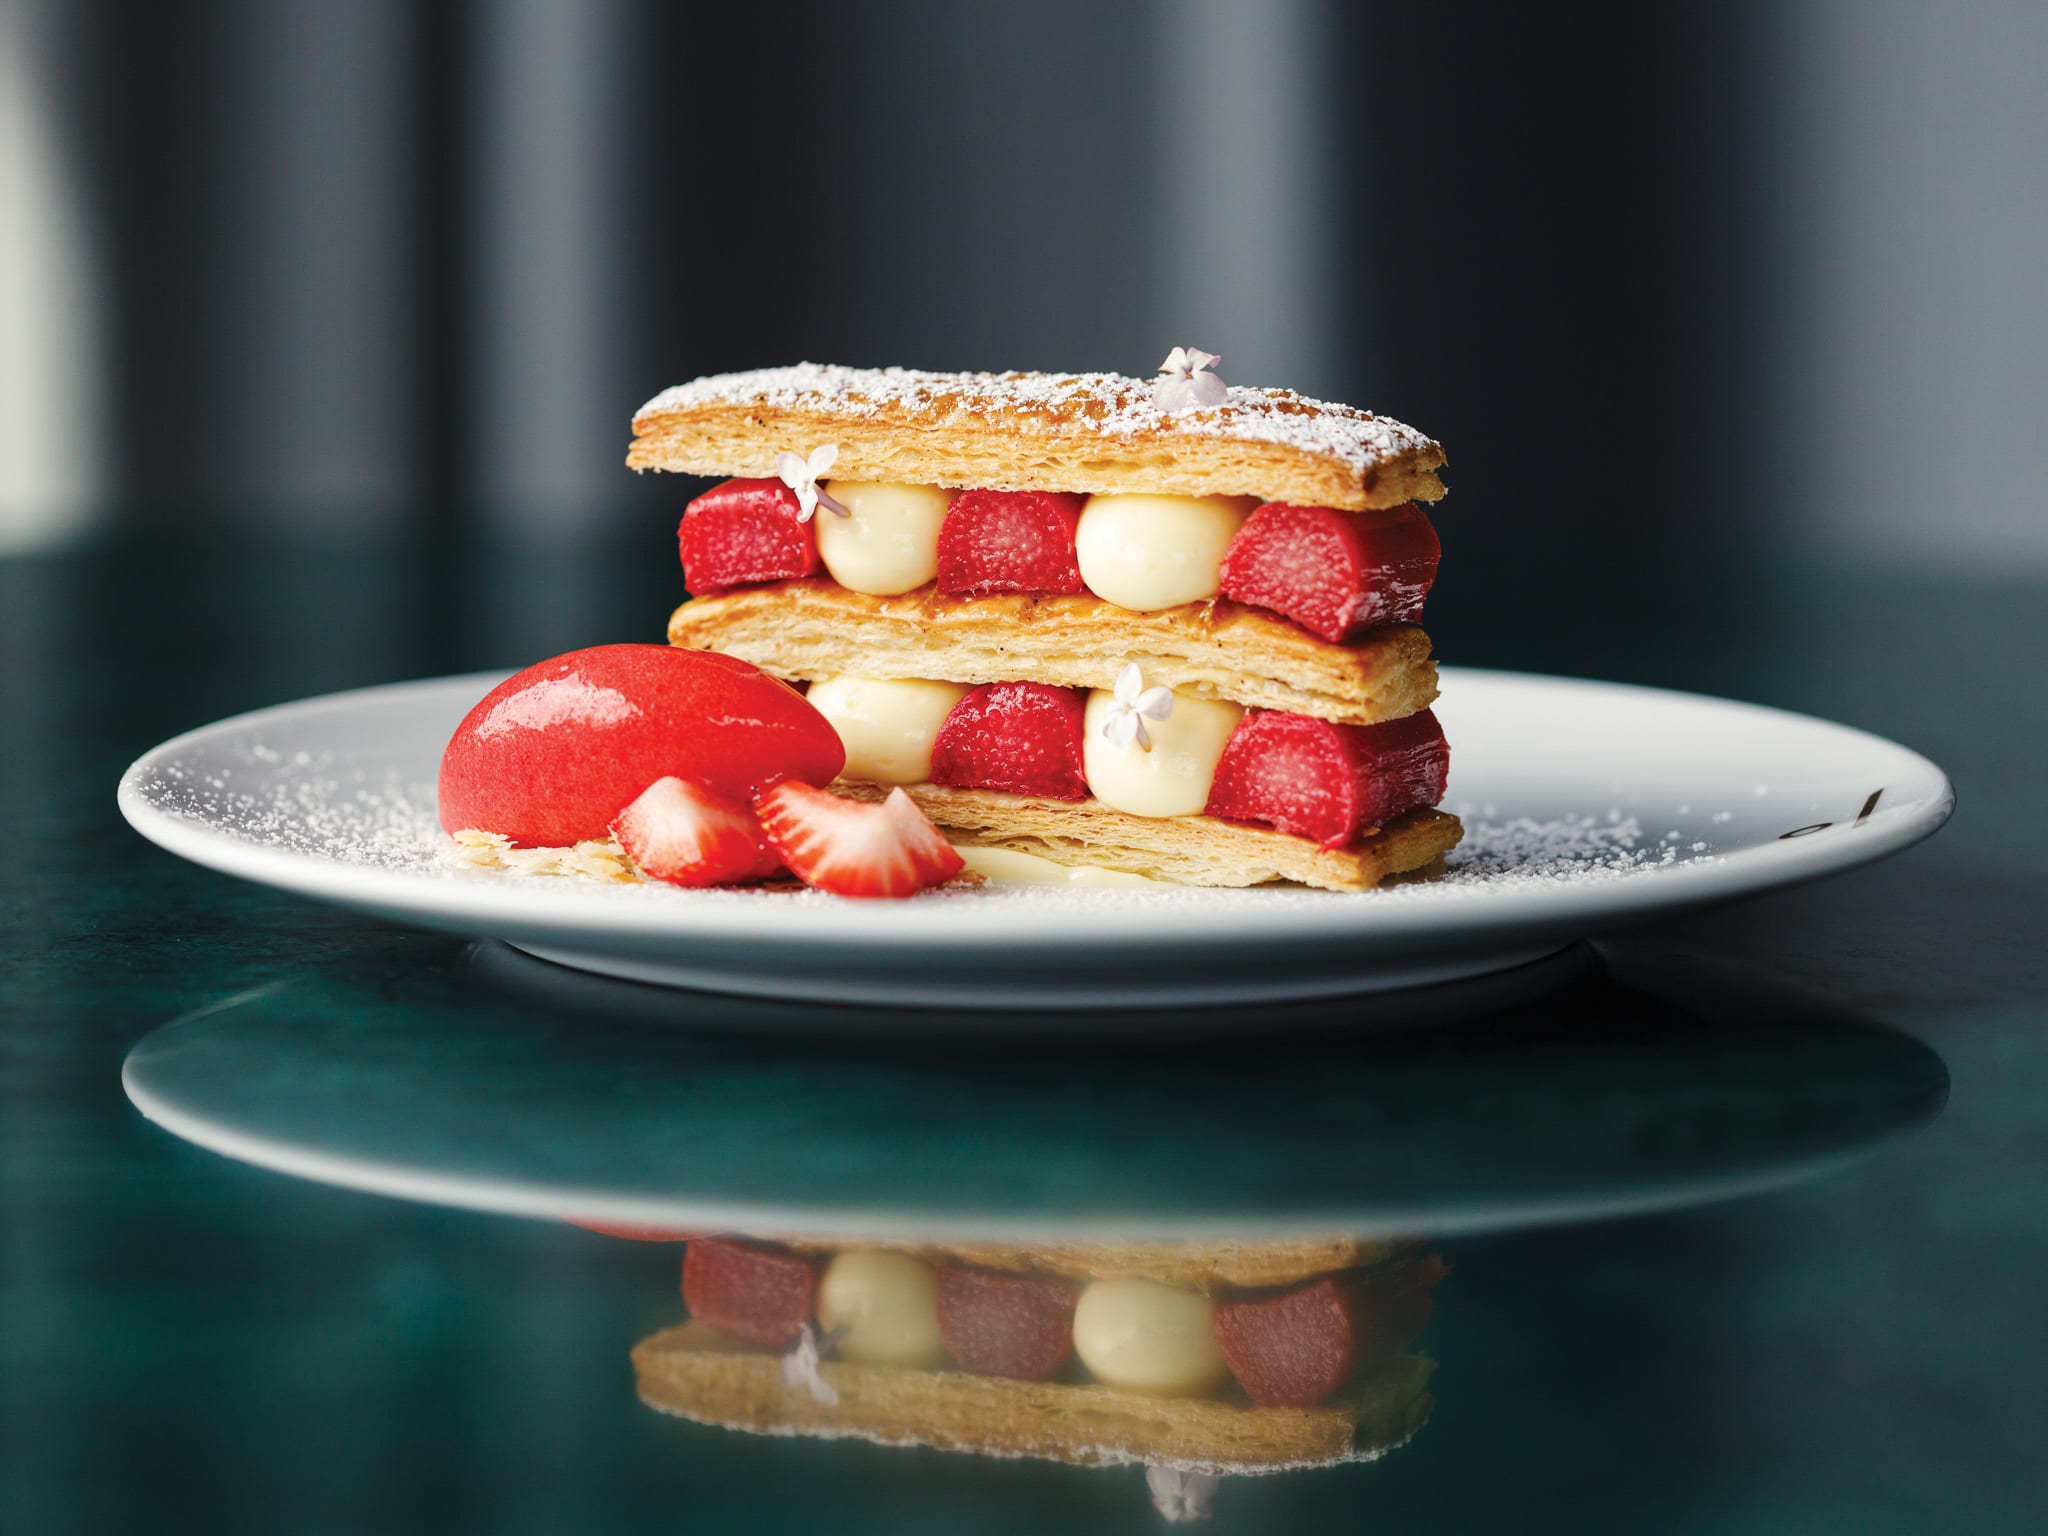 Mille-feuille with strawberry and rhubarb.